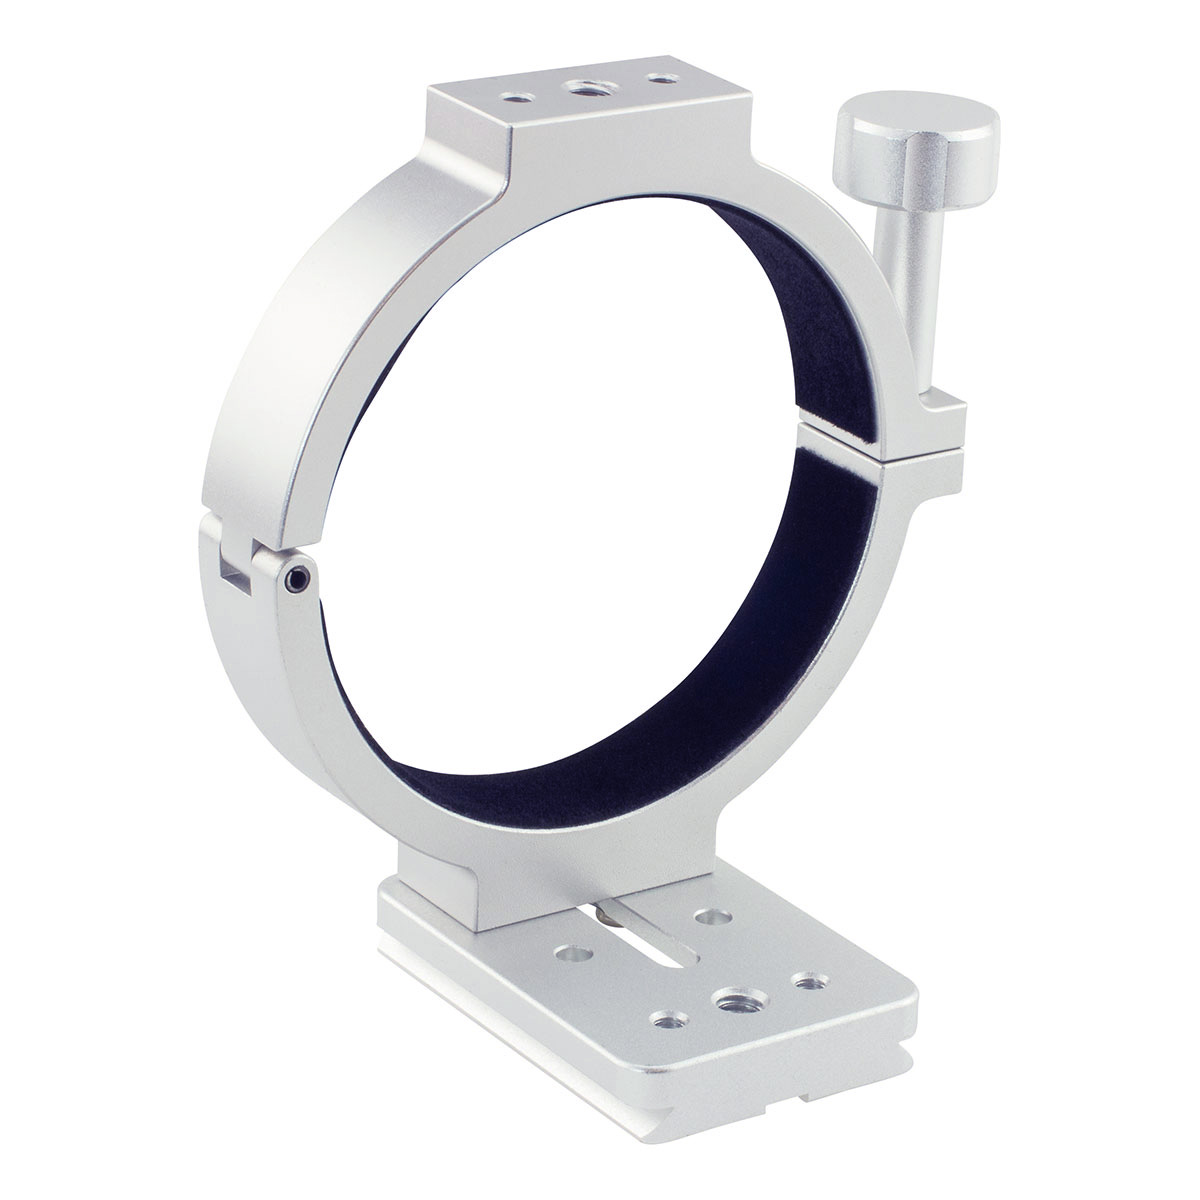 ZWO Holder Ring for ASI Cooled Cameras (78mm Diameters)